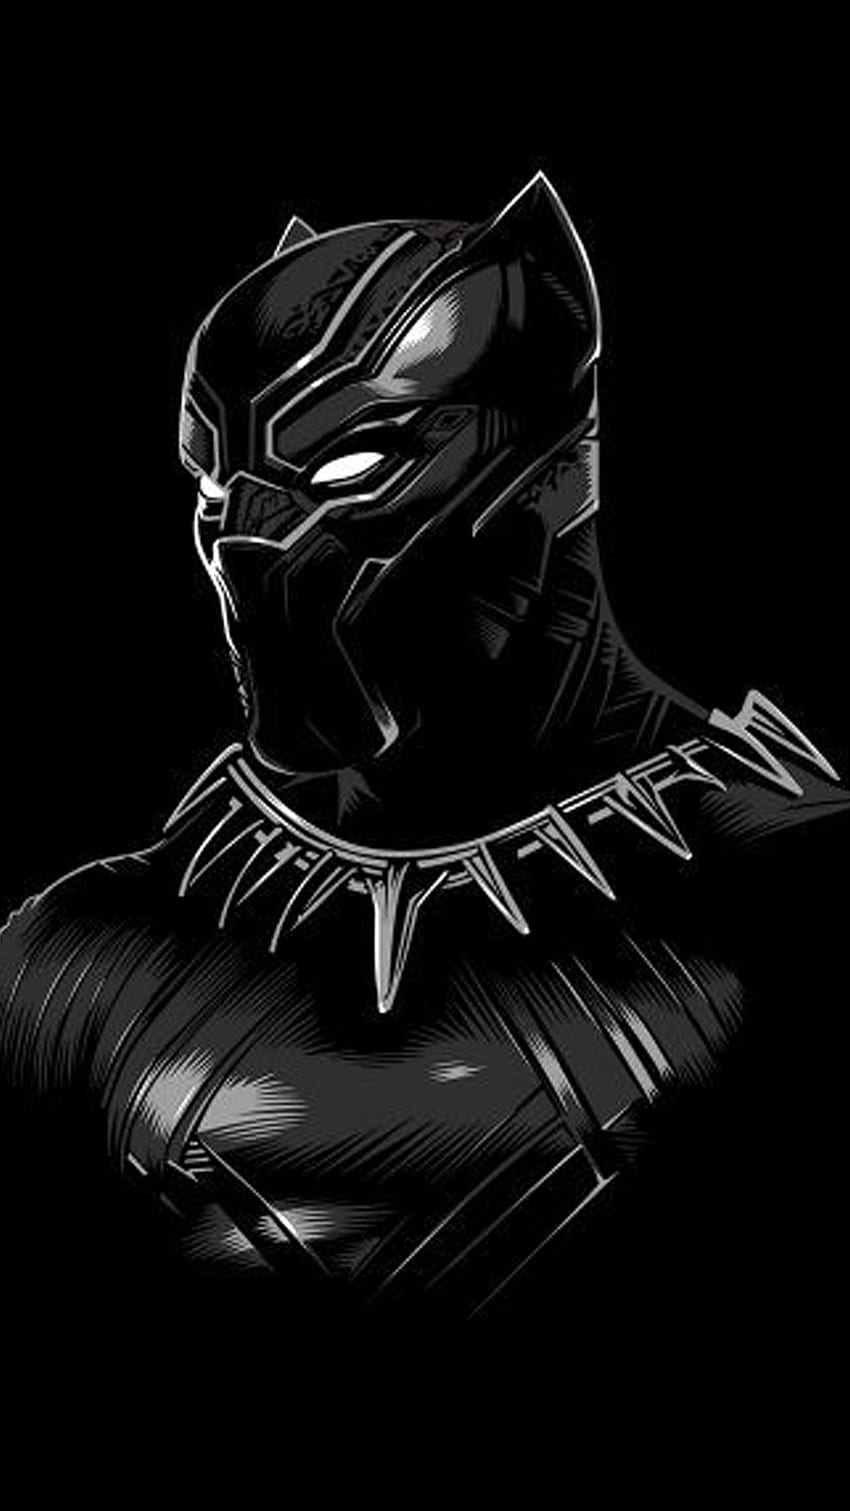 Black Panther Superhero Top Black Panther [] for your , Mobile & Tablet. Explore Black Panther Marvel Mobile . Black Panther Marvel Mobile , Black Panther, Black and White Superhero HD phone wallpaper